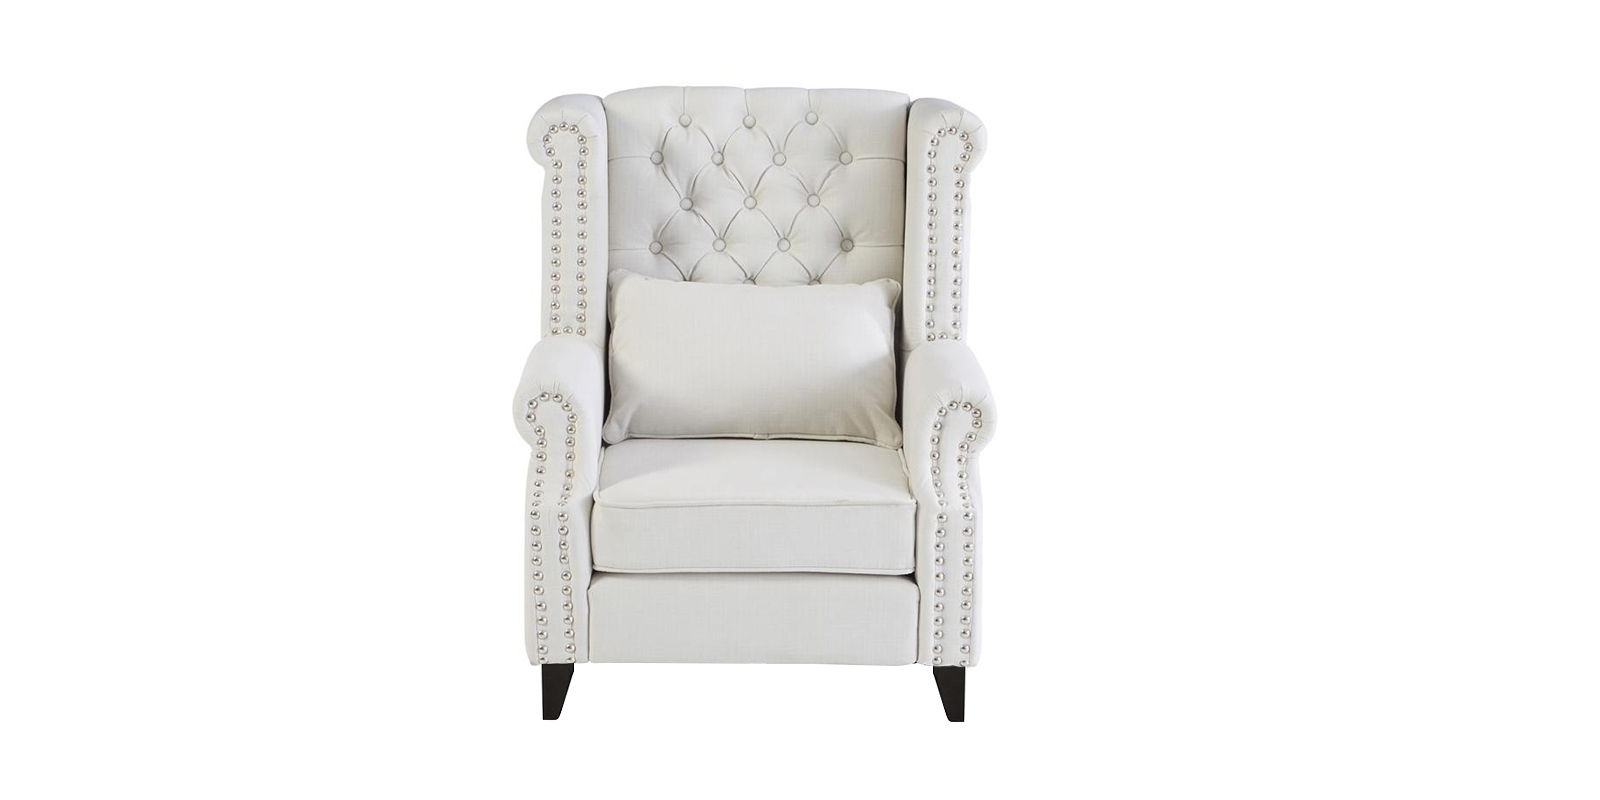 white wingback chair canada